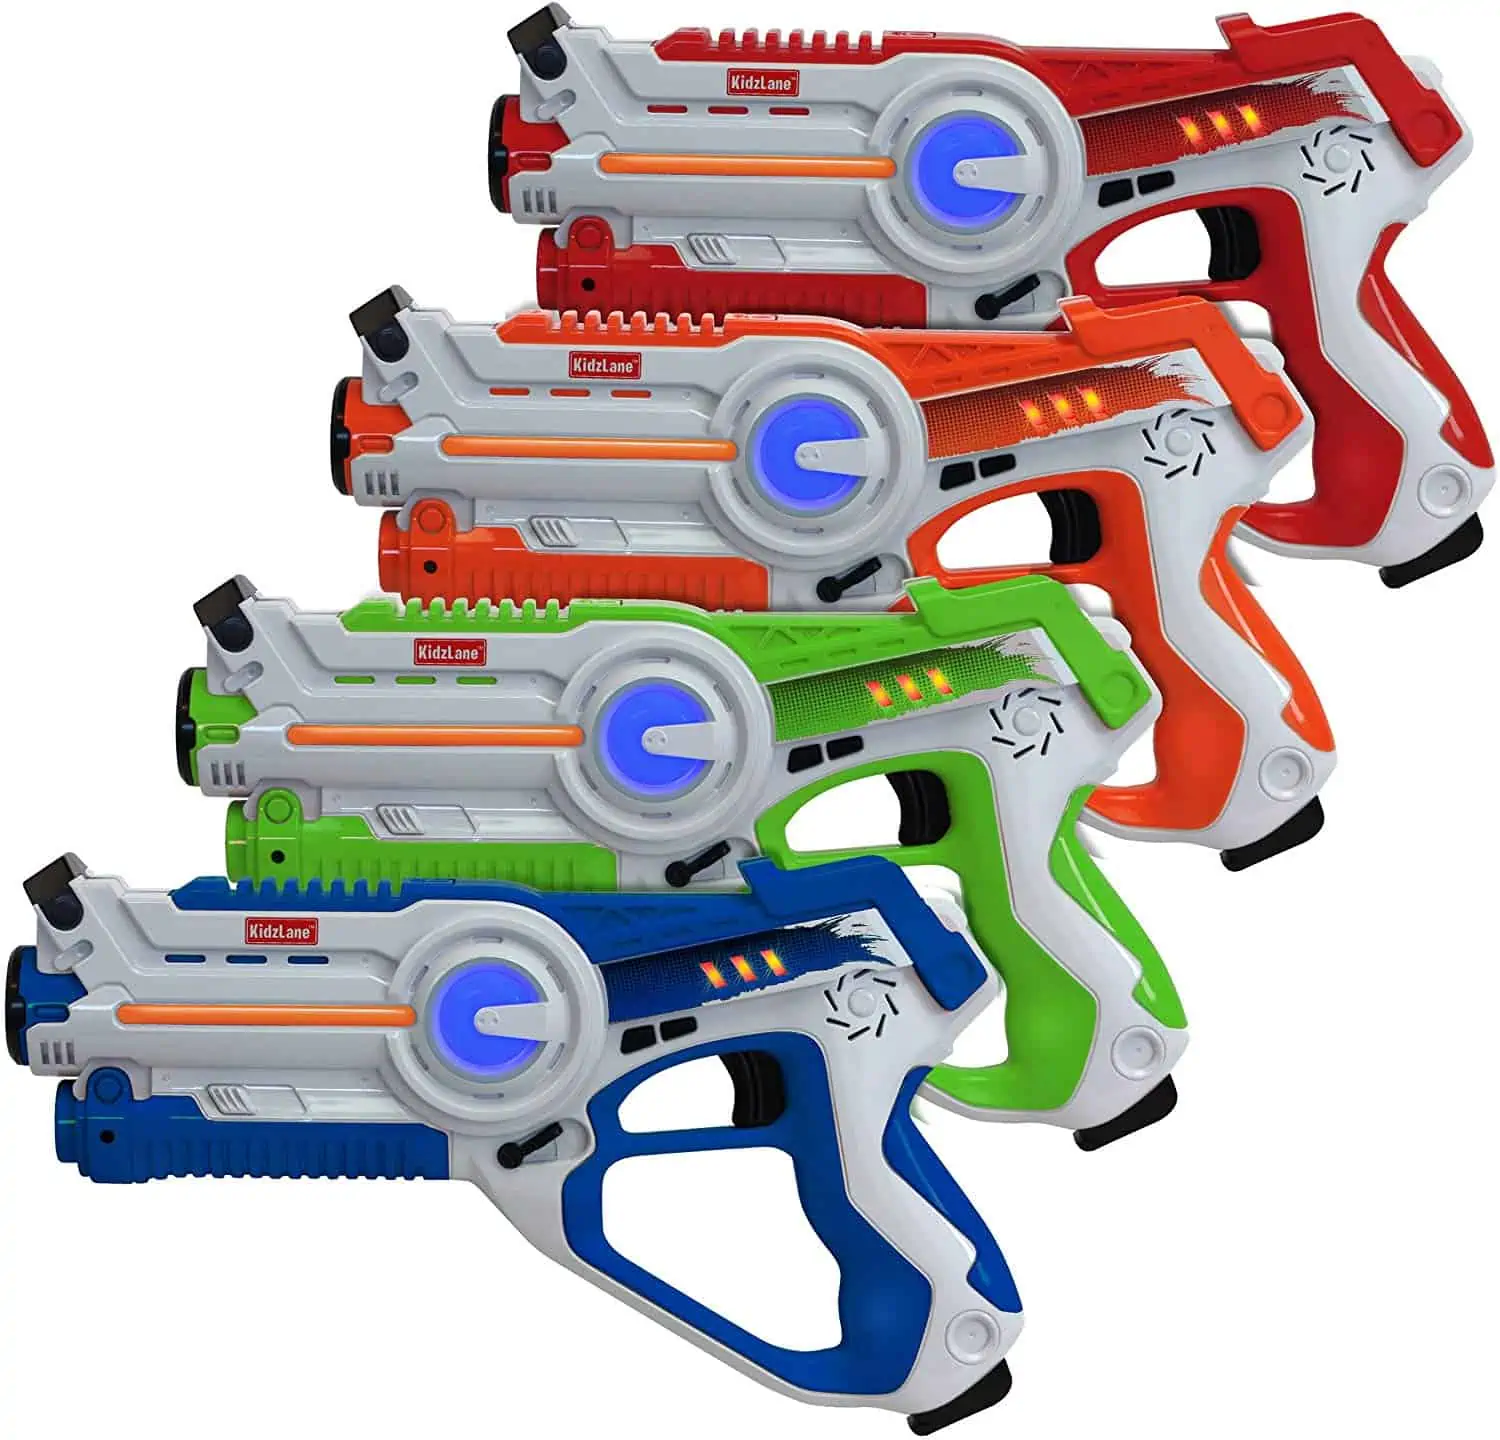 Toy guns available in a variety of colors.